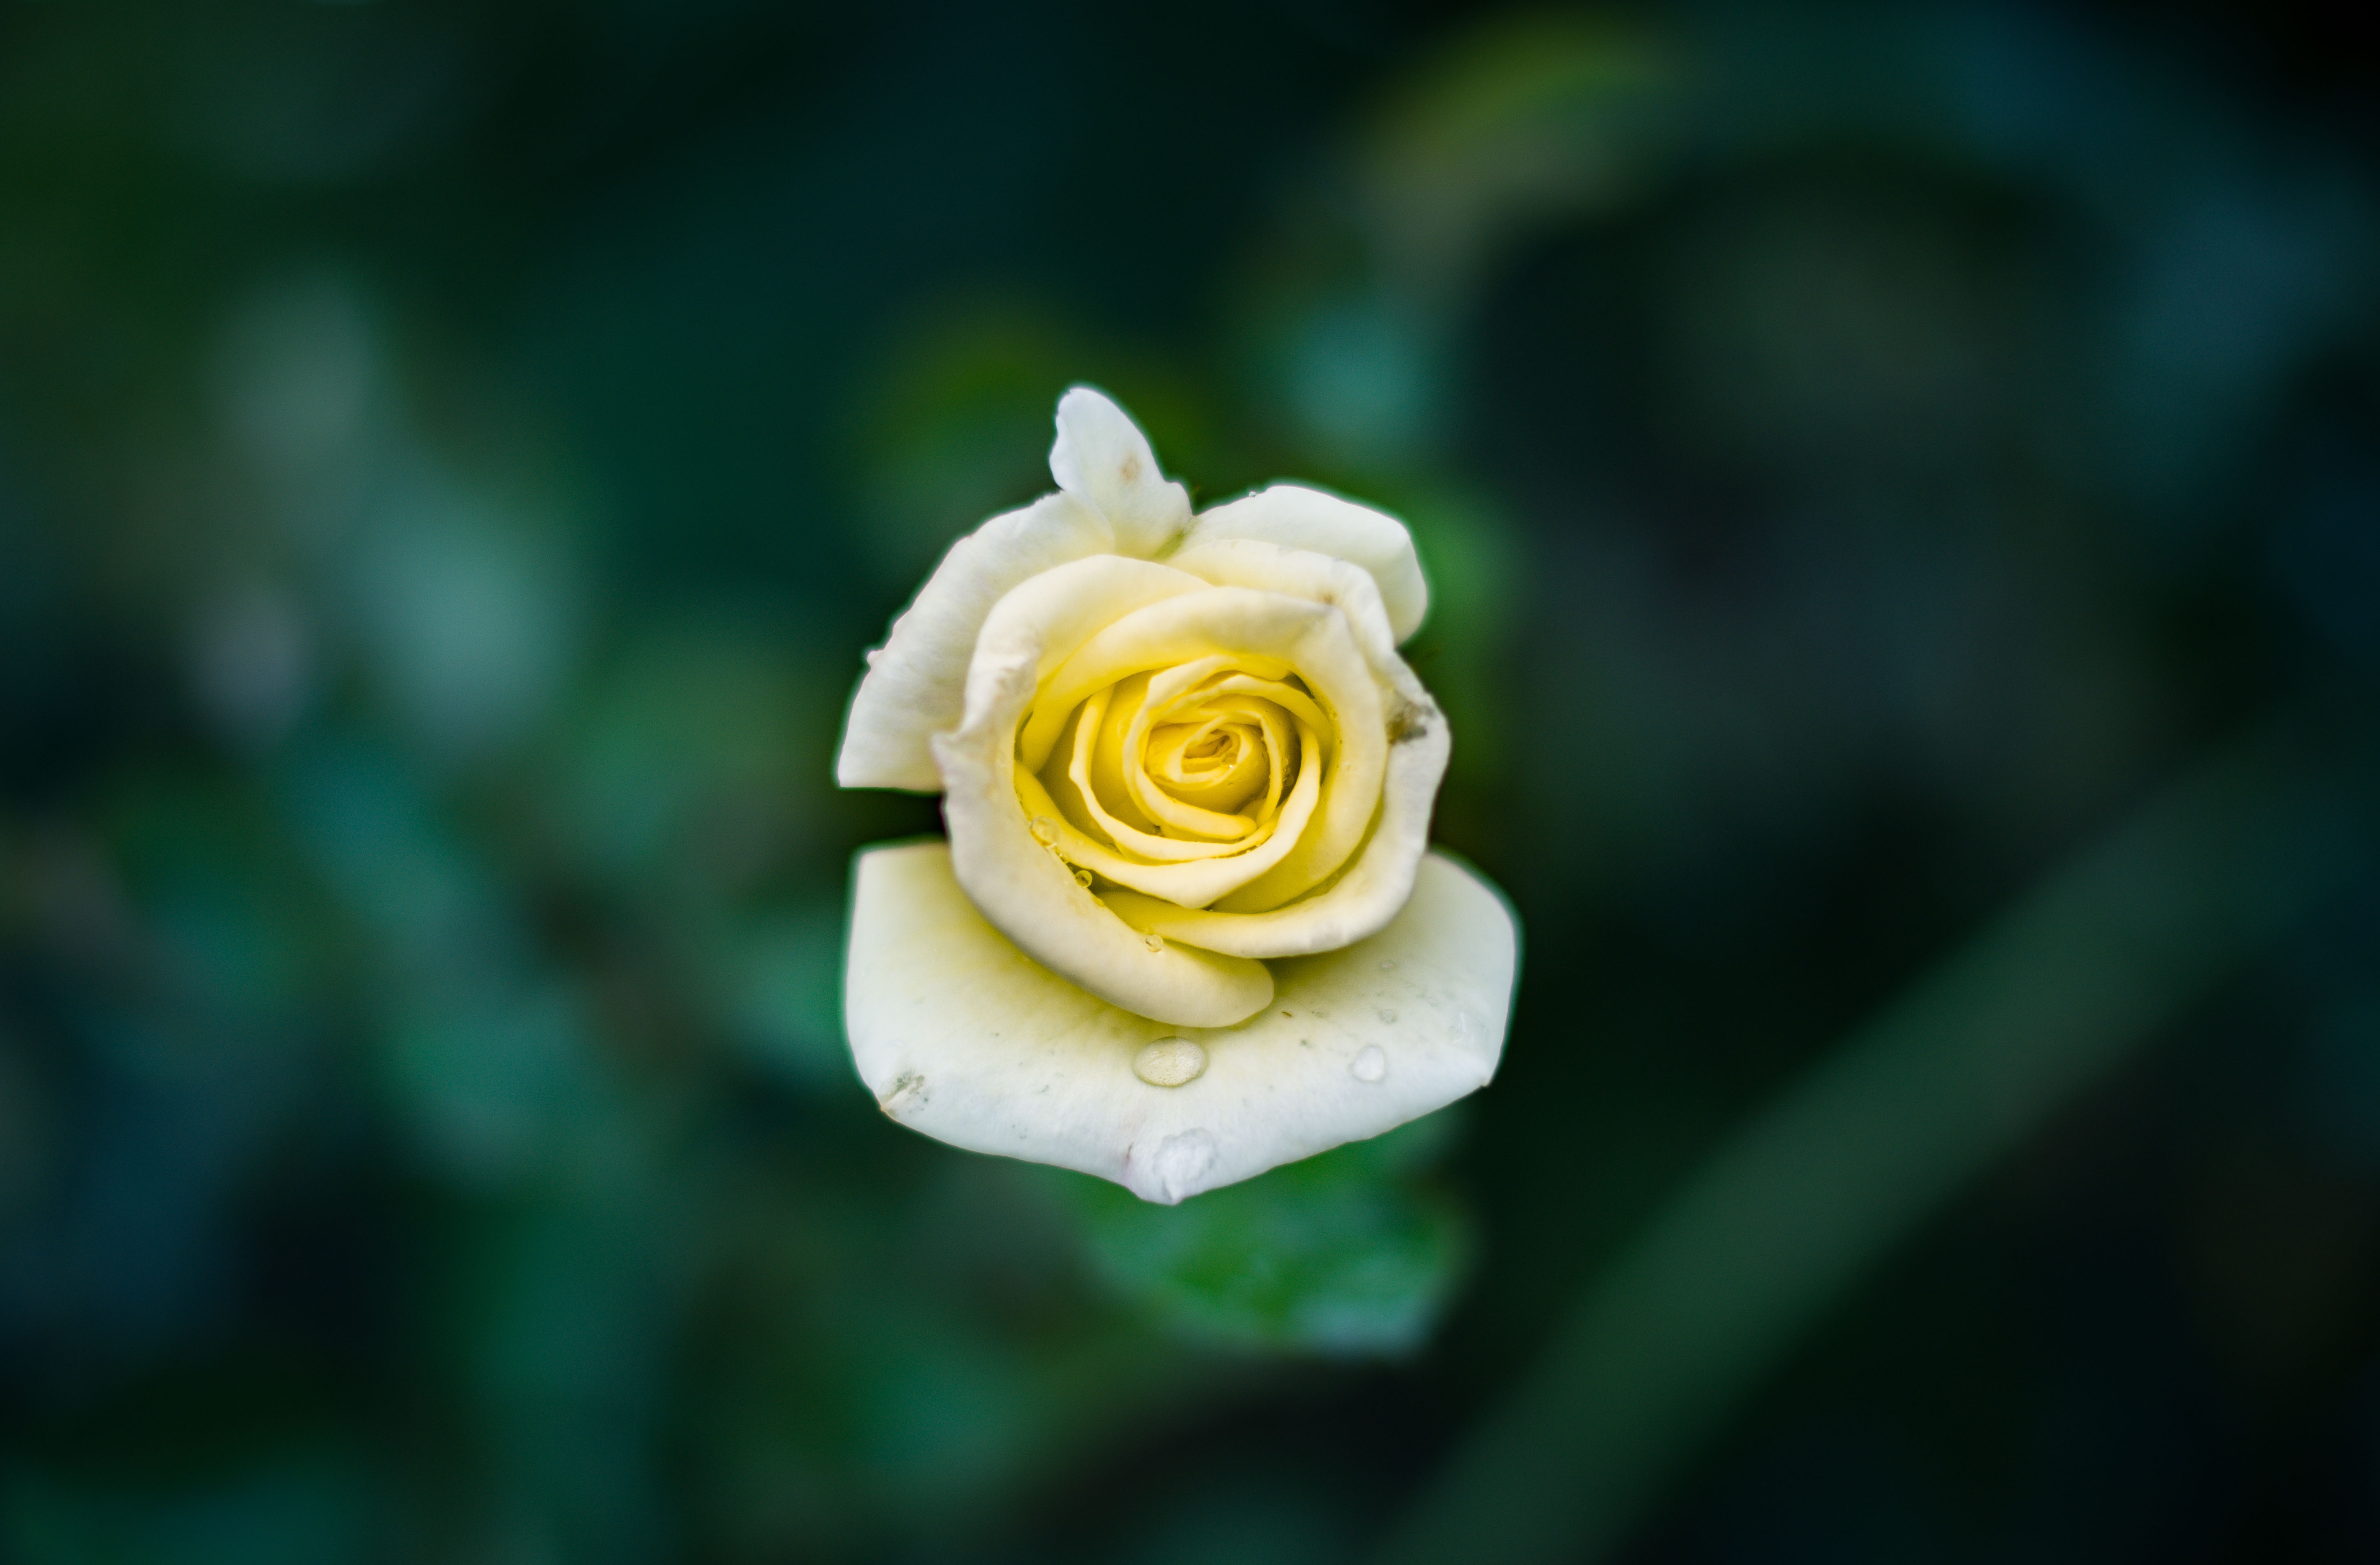 Free photo A single white rose on a blurred green background